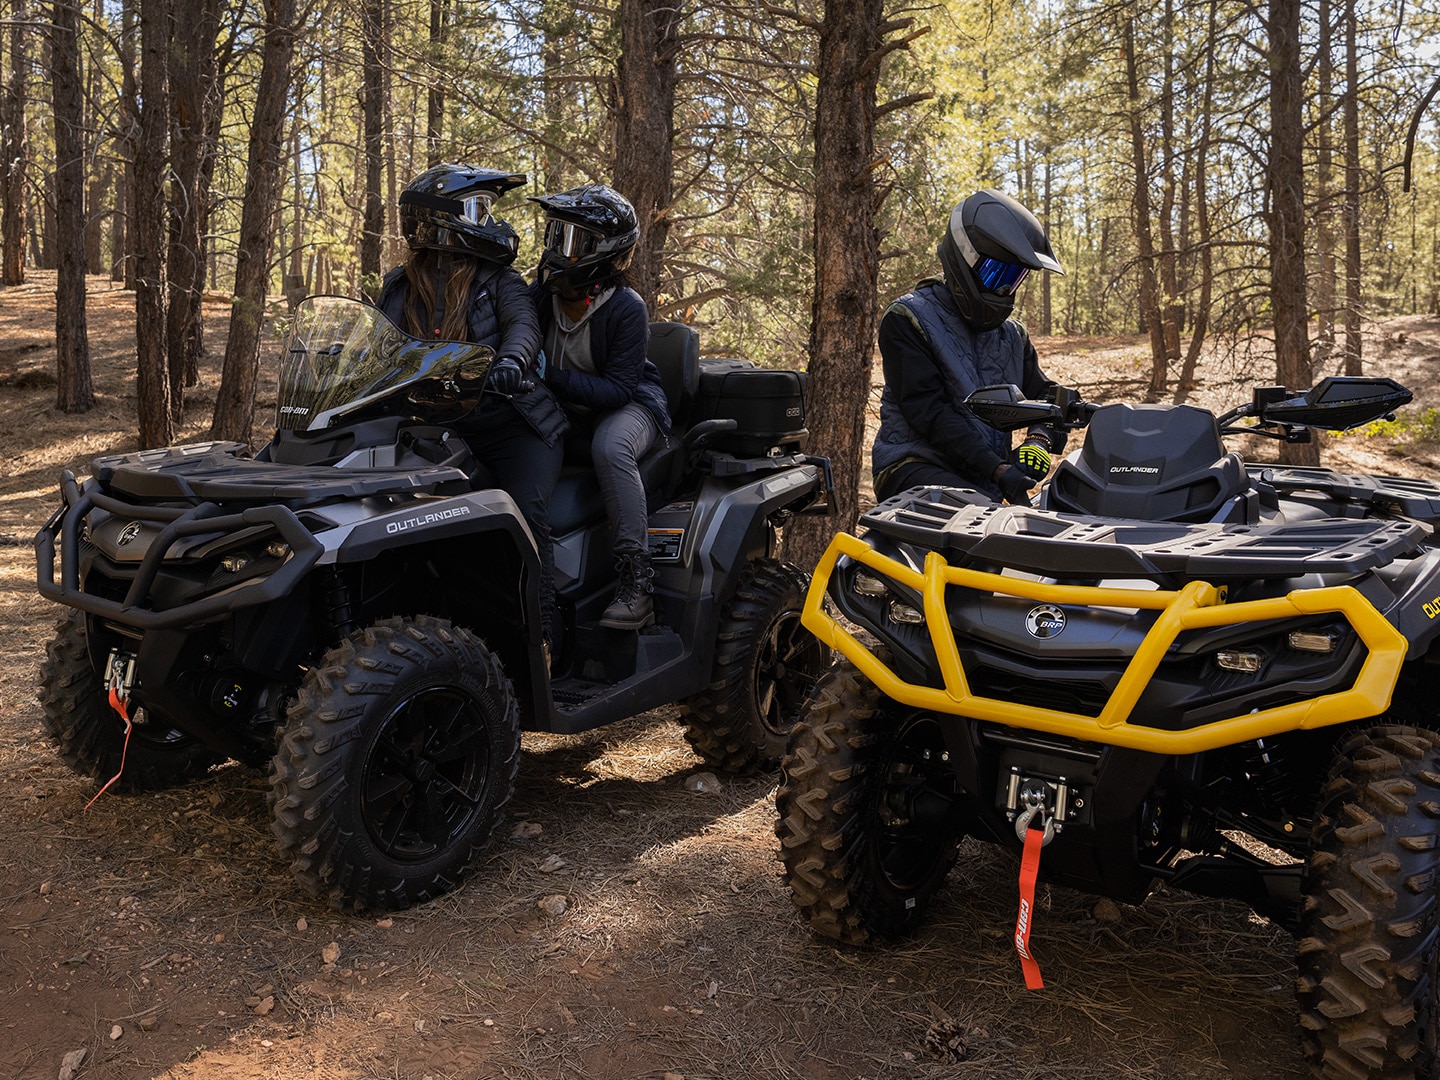 HOW TO INSTALL A WINCH ON YOUR CAN-AM ATV?